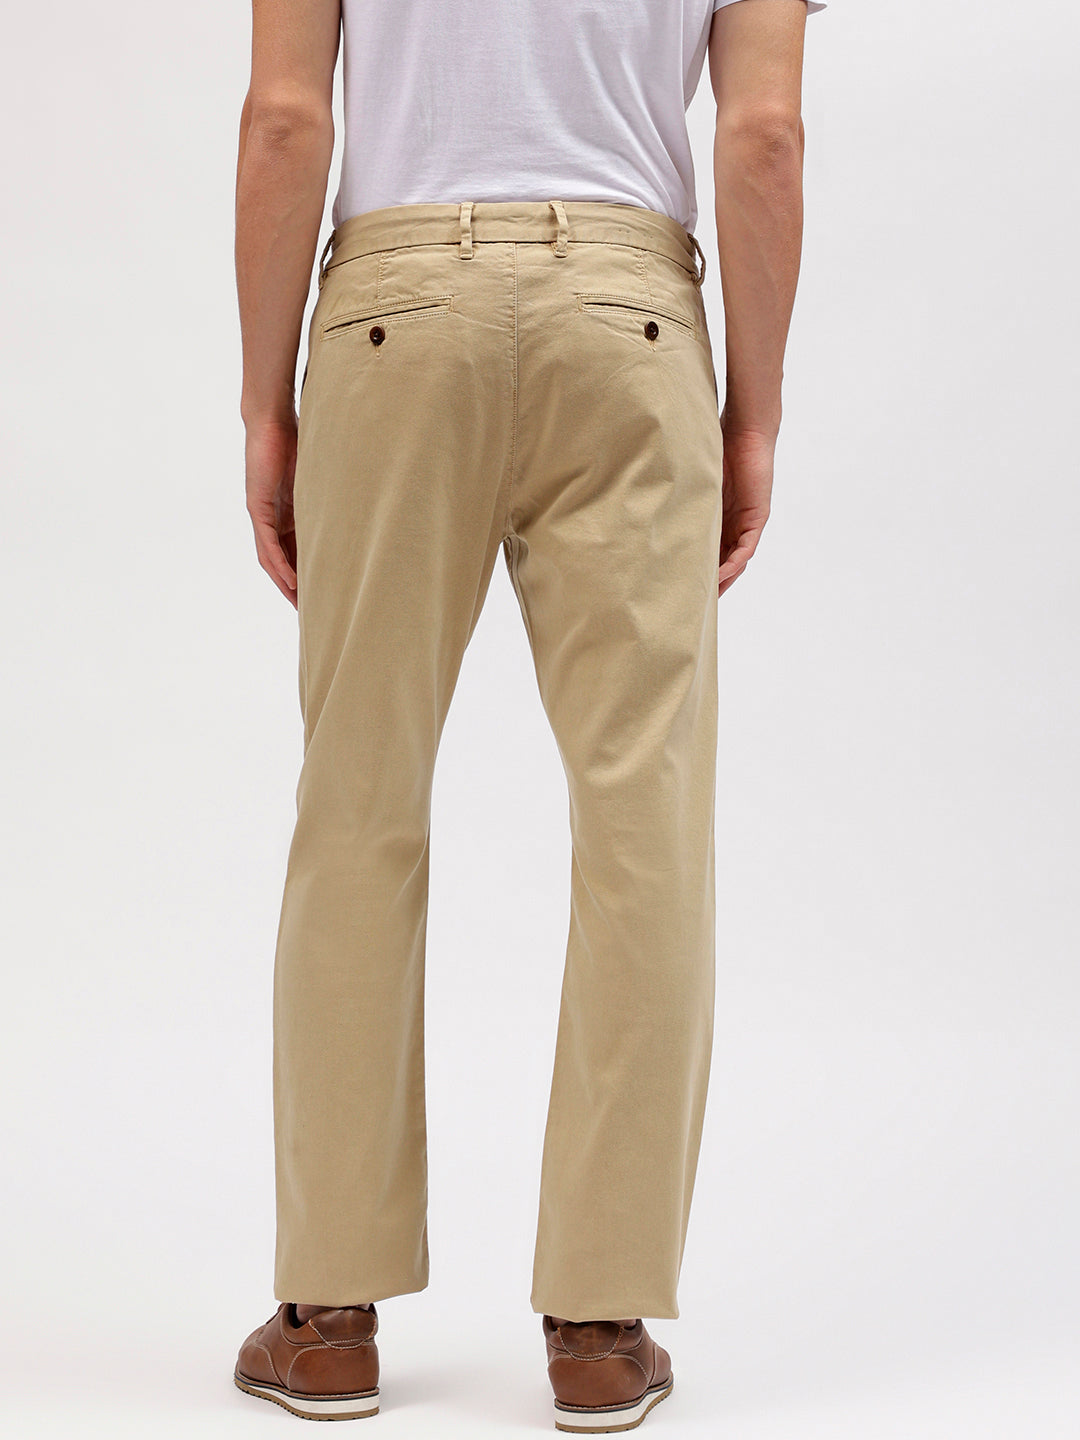 Valbone Mens Cotton Mid Rise Flat Front Trousers